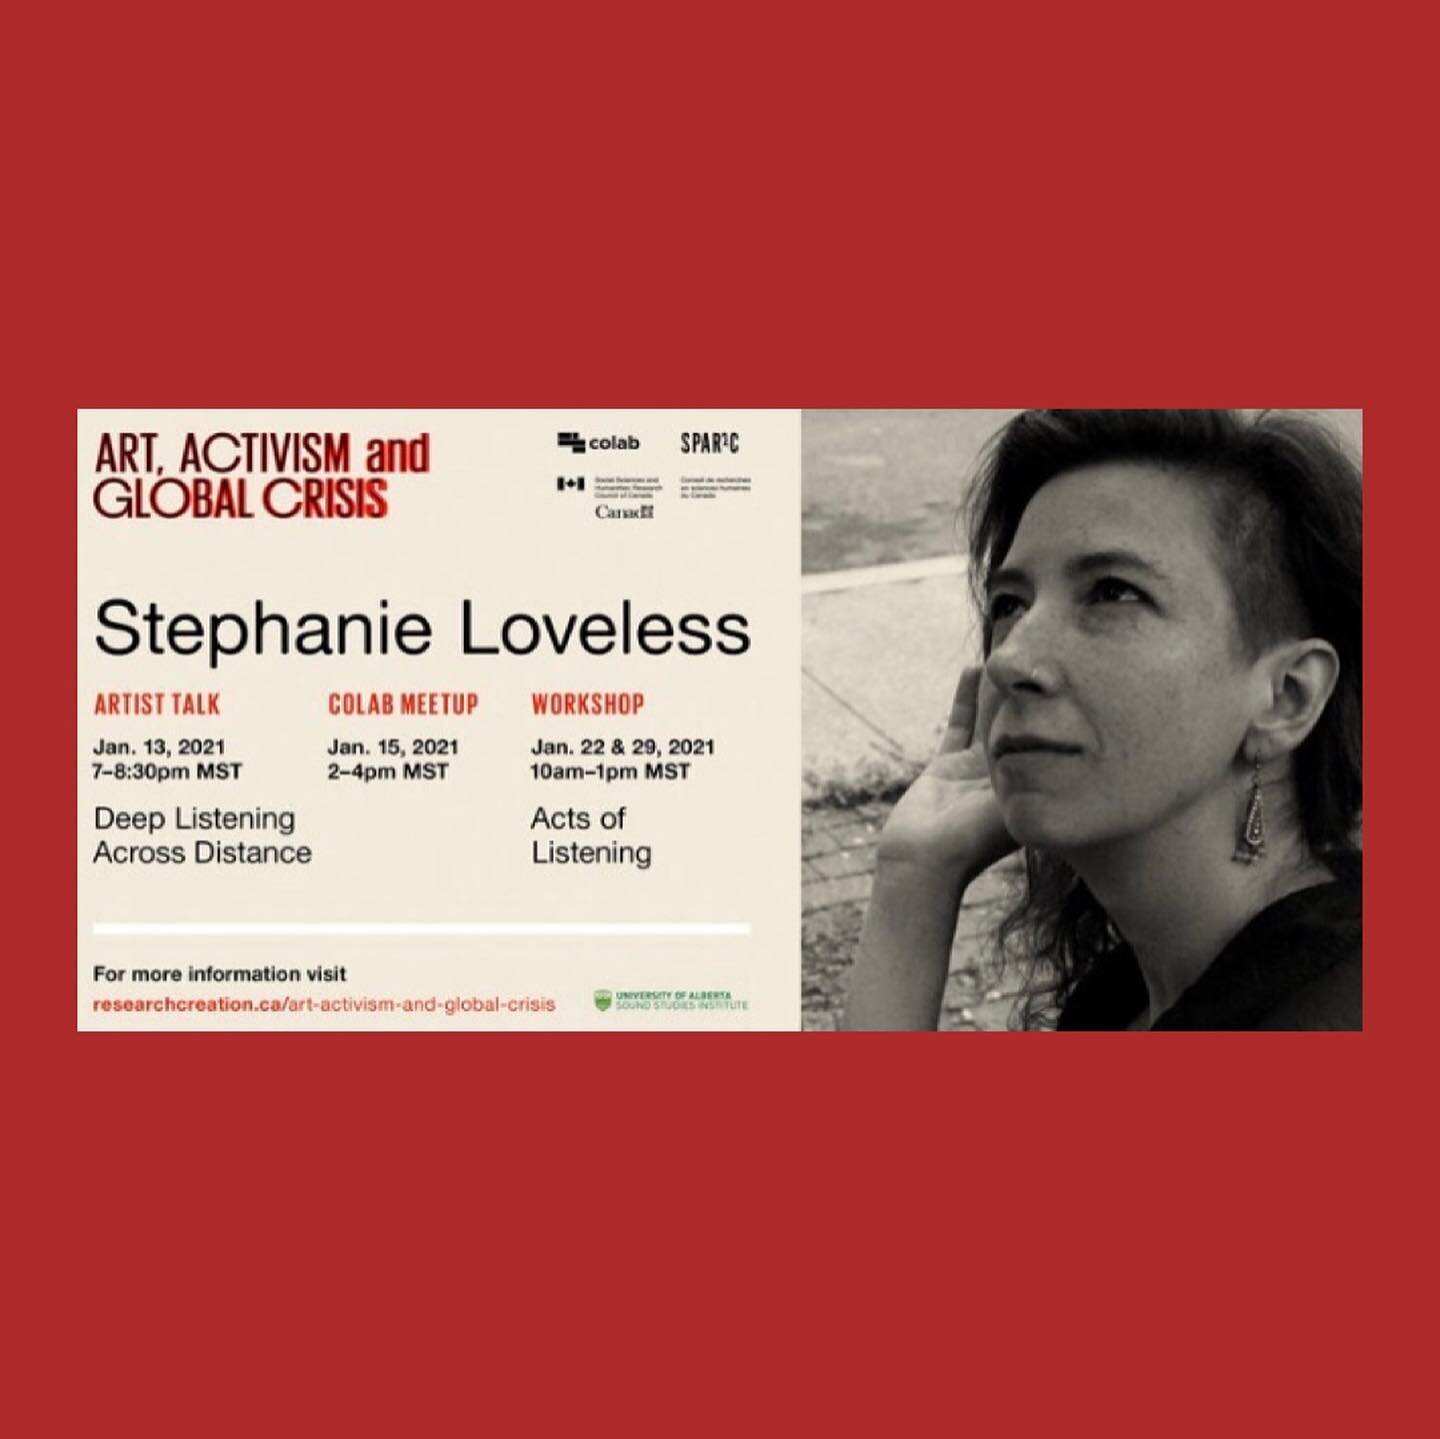 The @researchcreation team is excited to announce Stephanie Loveless as the first guest of the 2021 Art, Activism, and Global Crisis Speaker Series!
.
Please visit RESEARCHCREATION.ca to register on eventbrite.
.

Stephanie Loveless is a sound and me